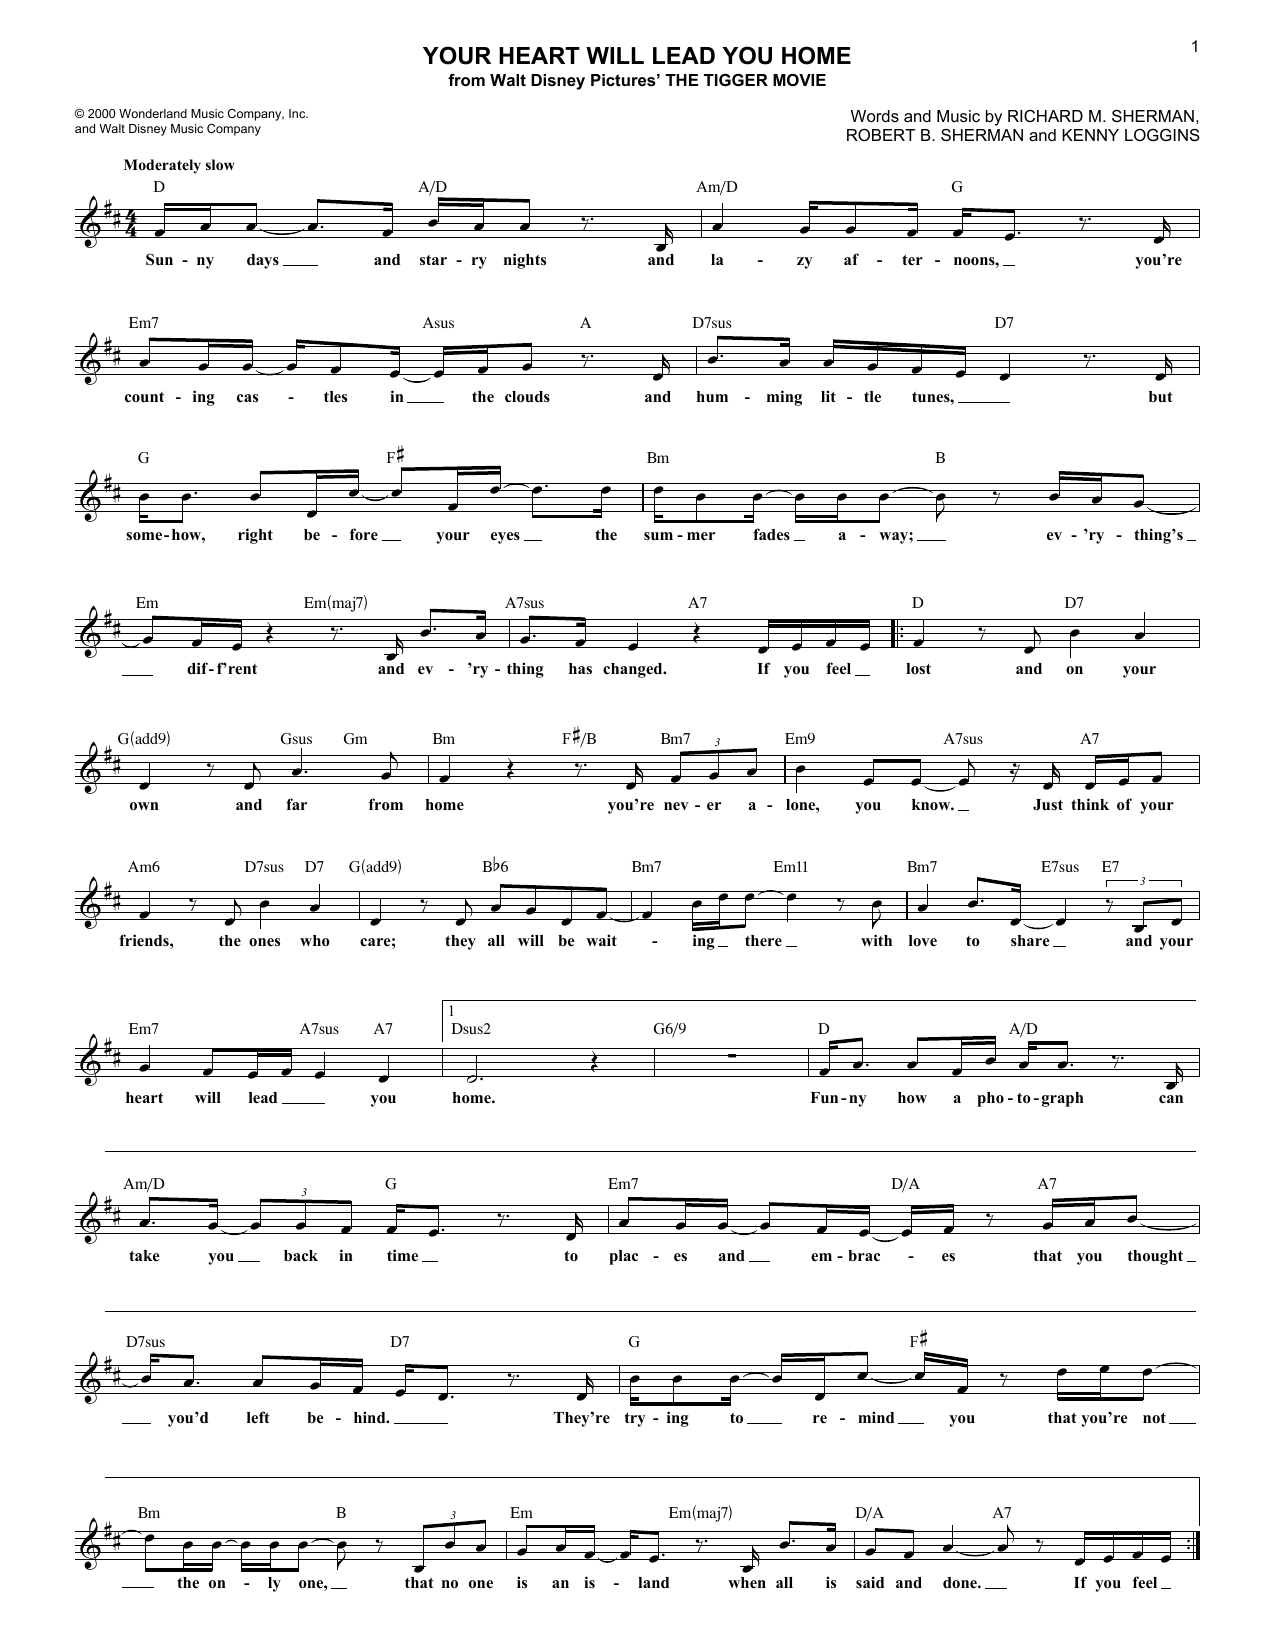 Download Richard M. Sherman Your Heart Will Lead You Home Sheet Music